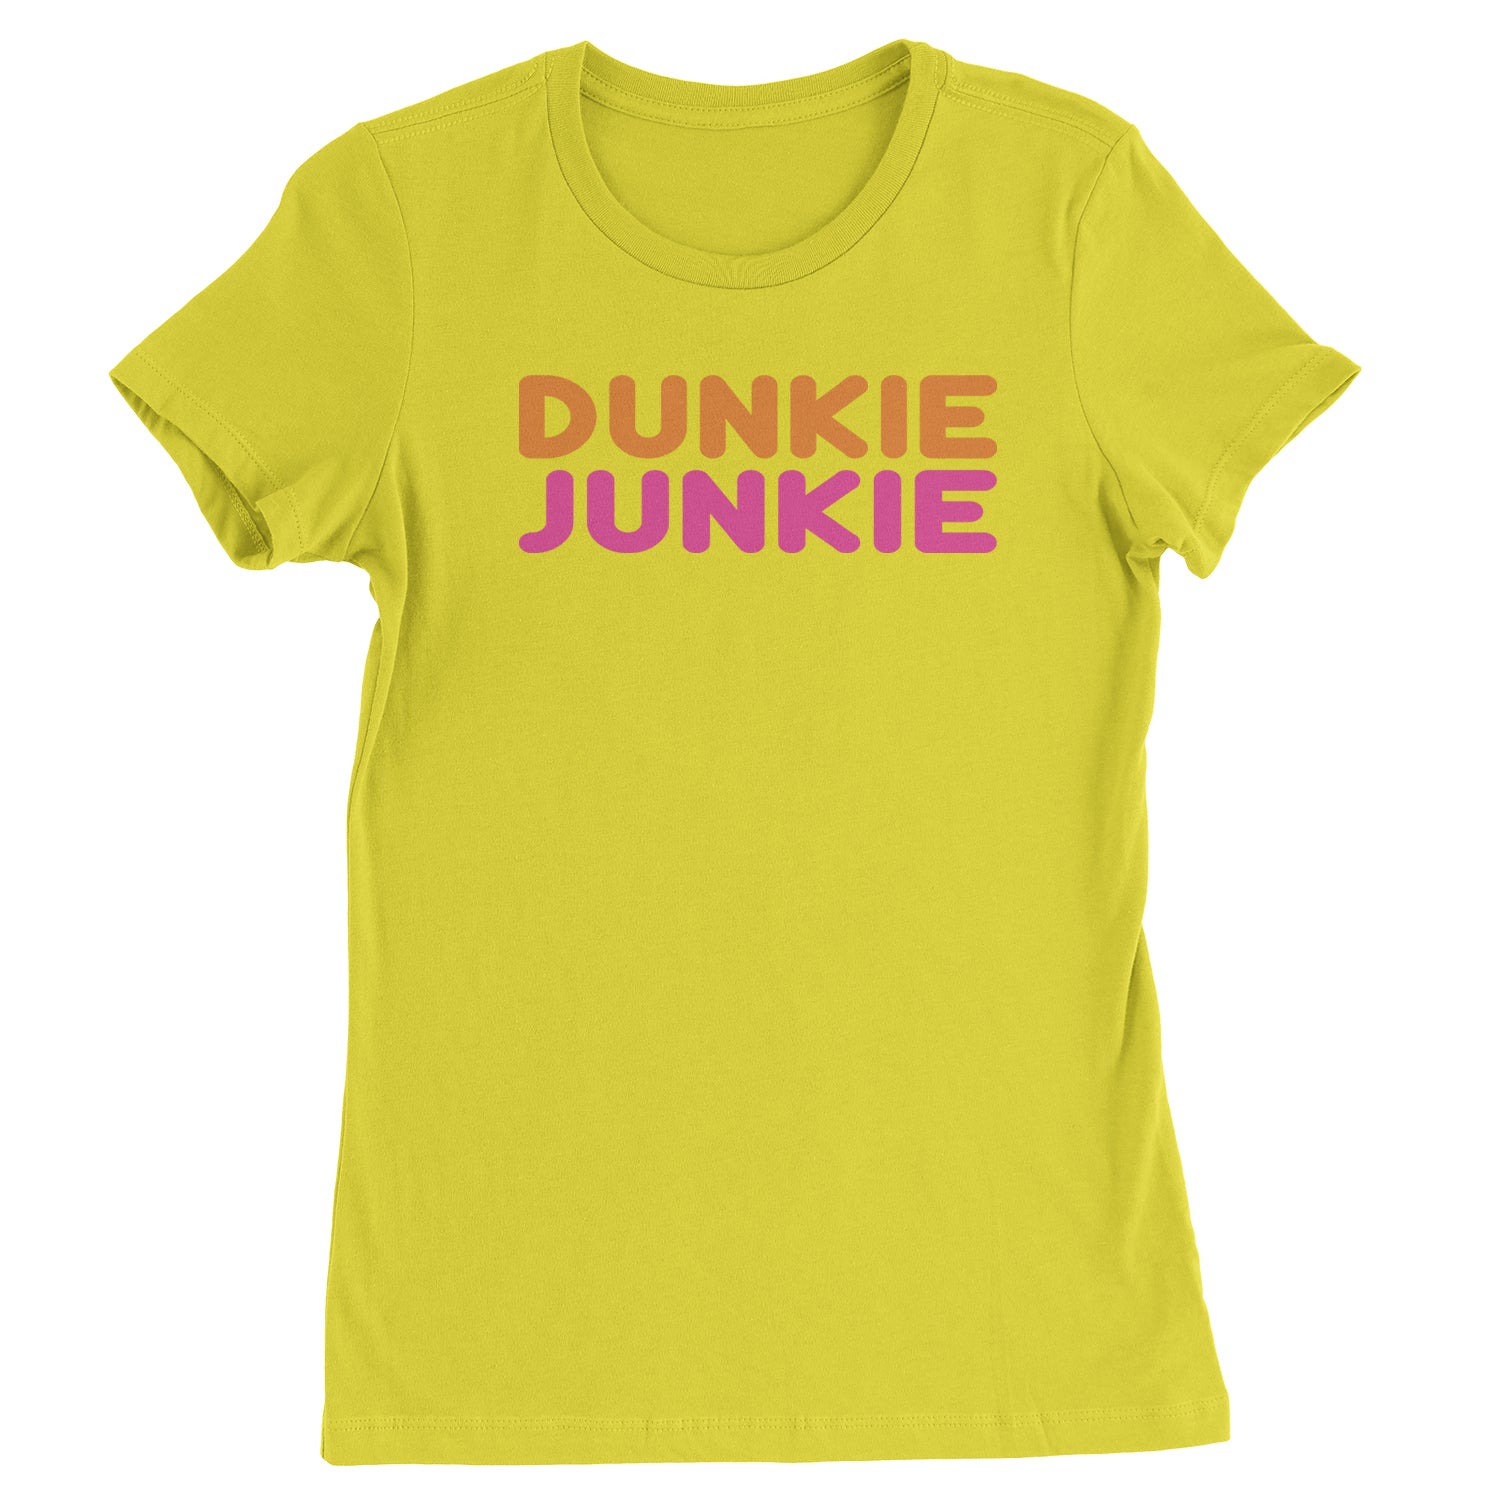 Dunkie Junkie Womens T-shirt addict, capuccino, coffee, dd, dnkn, dunkin, dunking, latte by Expression Tees